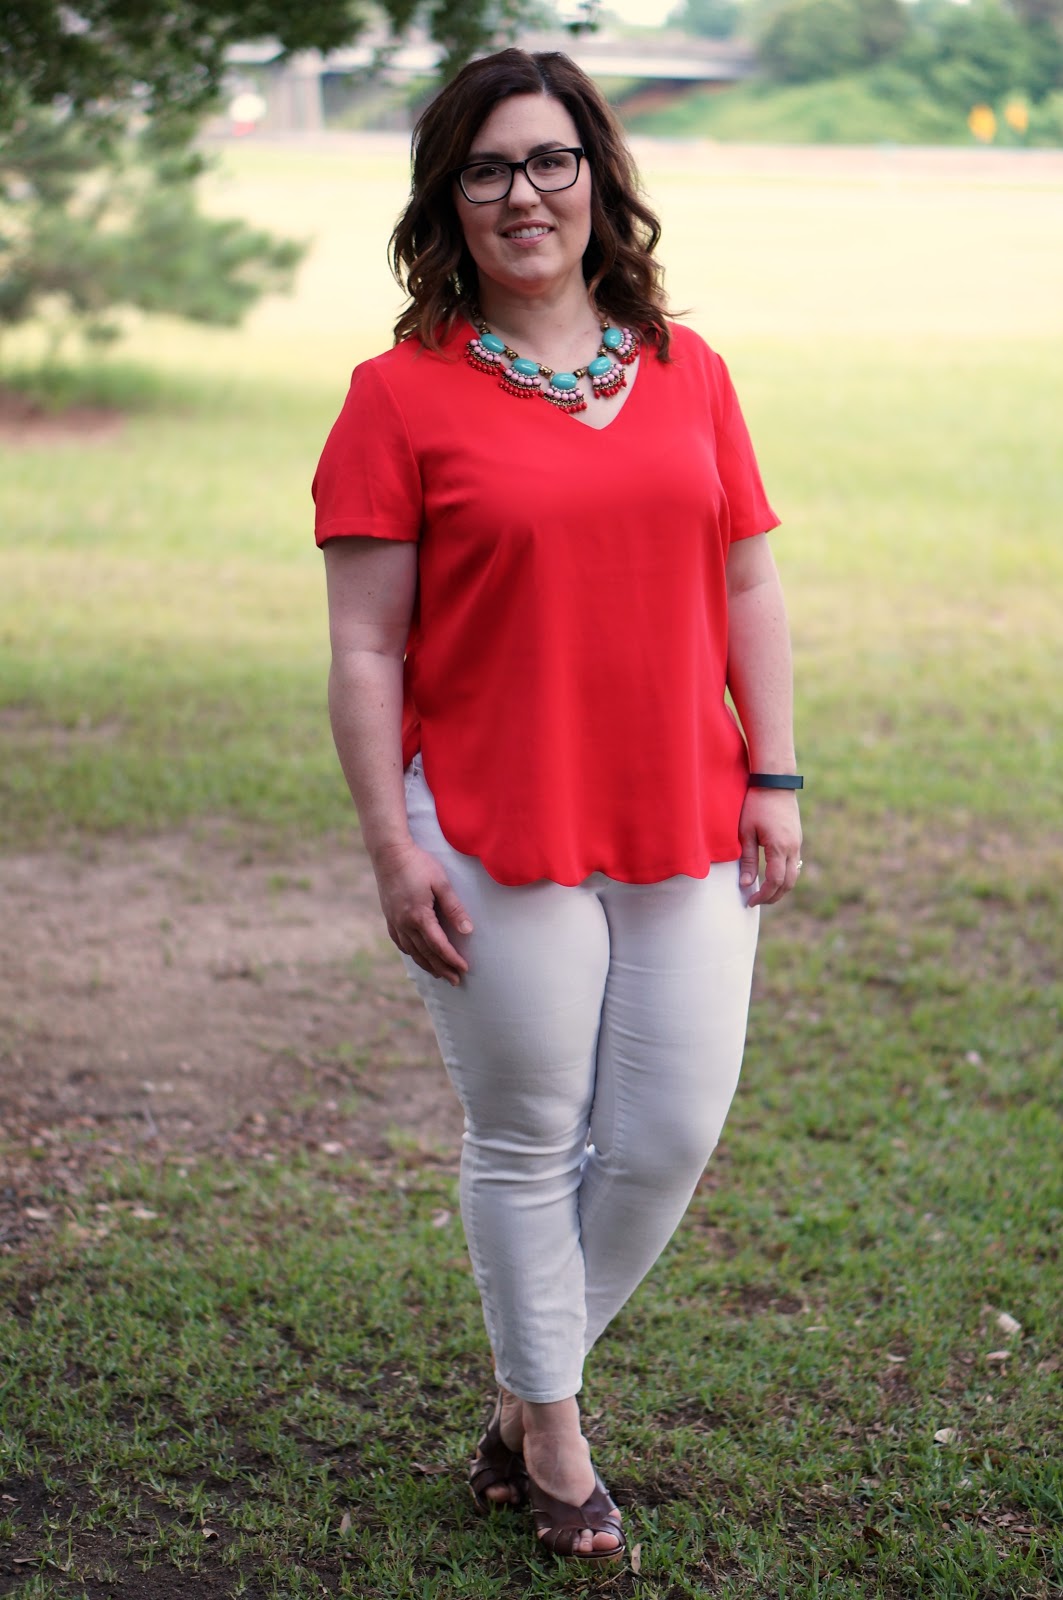 Rebecca Lately Stitch Fix 41Hawthorn Catalonia Scallop Trim Blouse Ann Taylor Skinny Jeans Target Wedges Fan Fringe Necklace